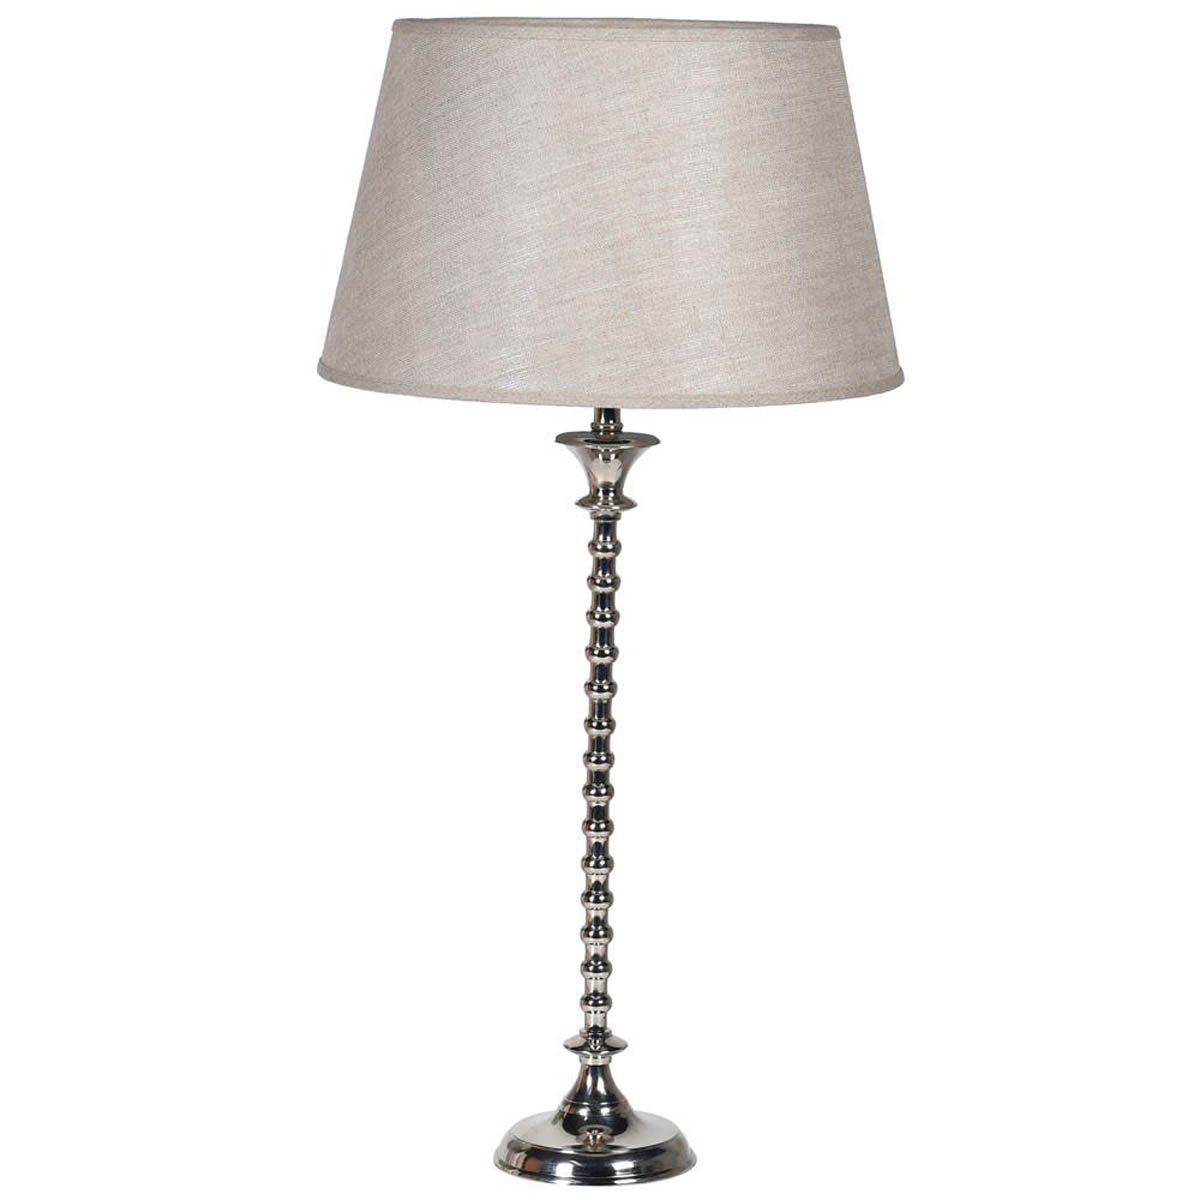 Tall Slim Silver Table Lamp Fizzy Fox, Tall Slim Table Lamps Uk